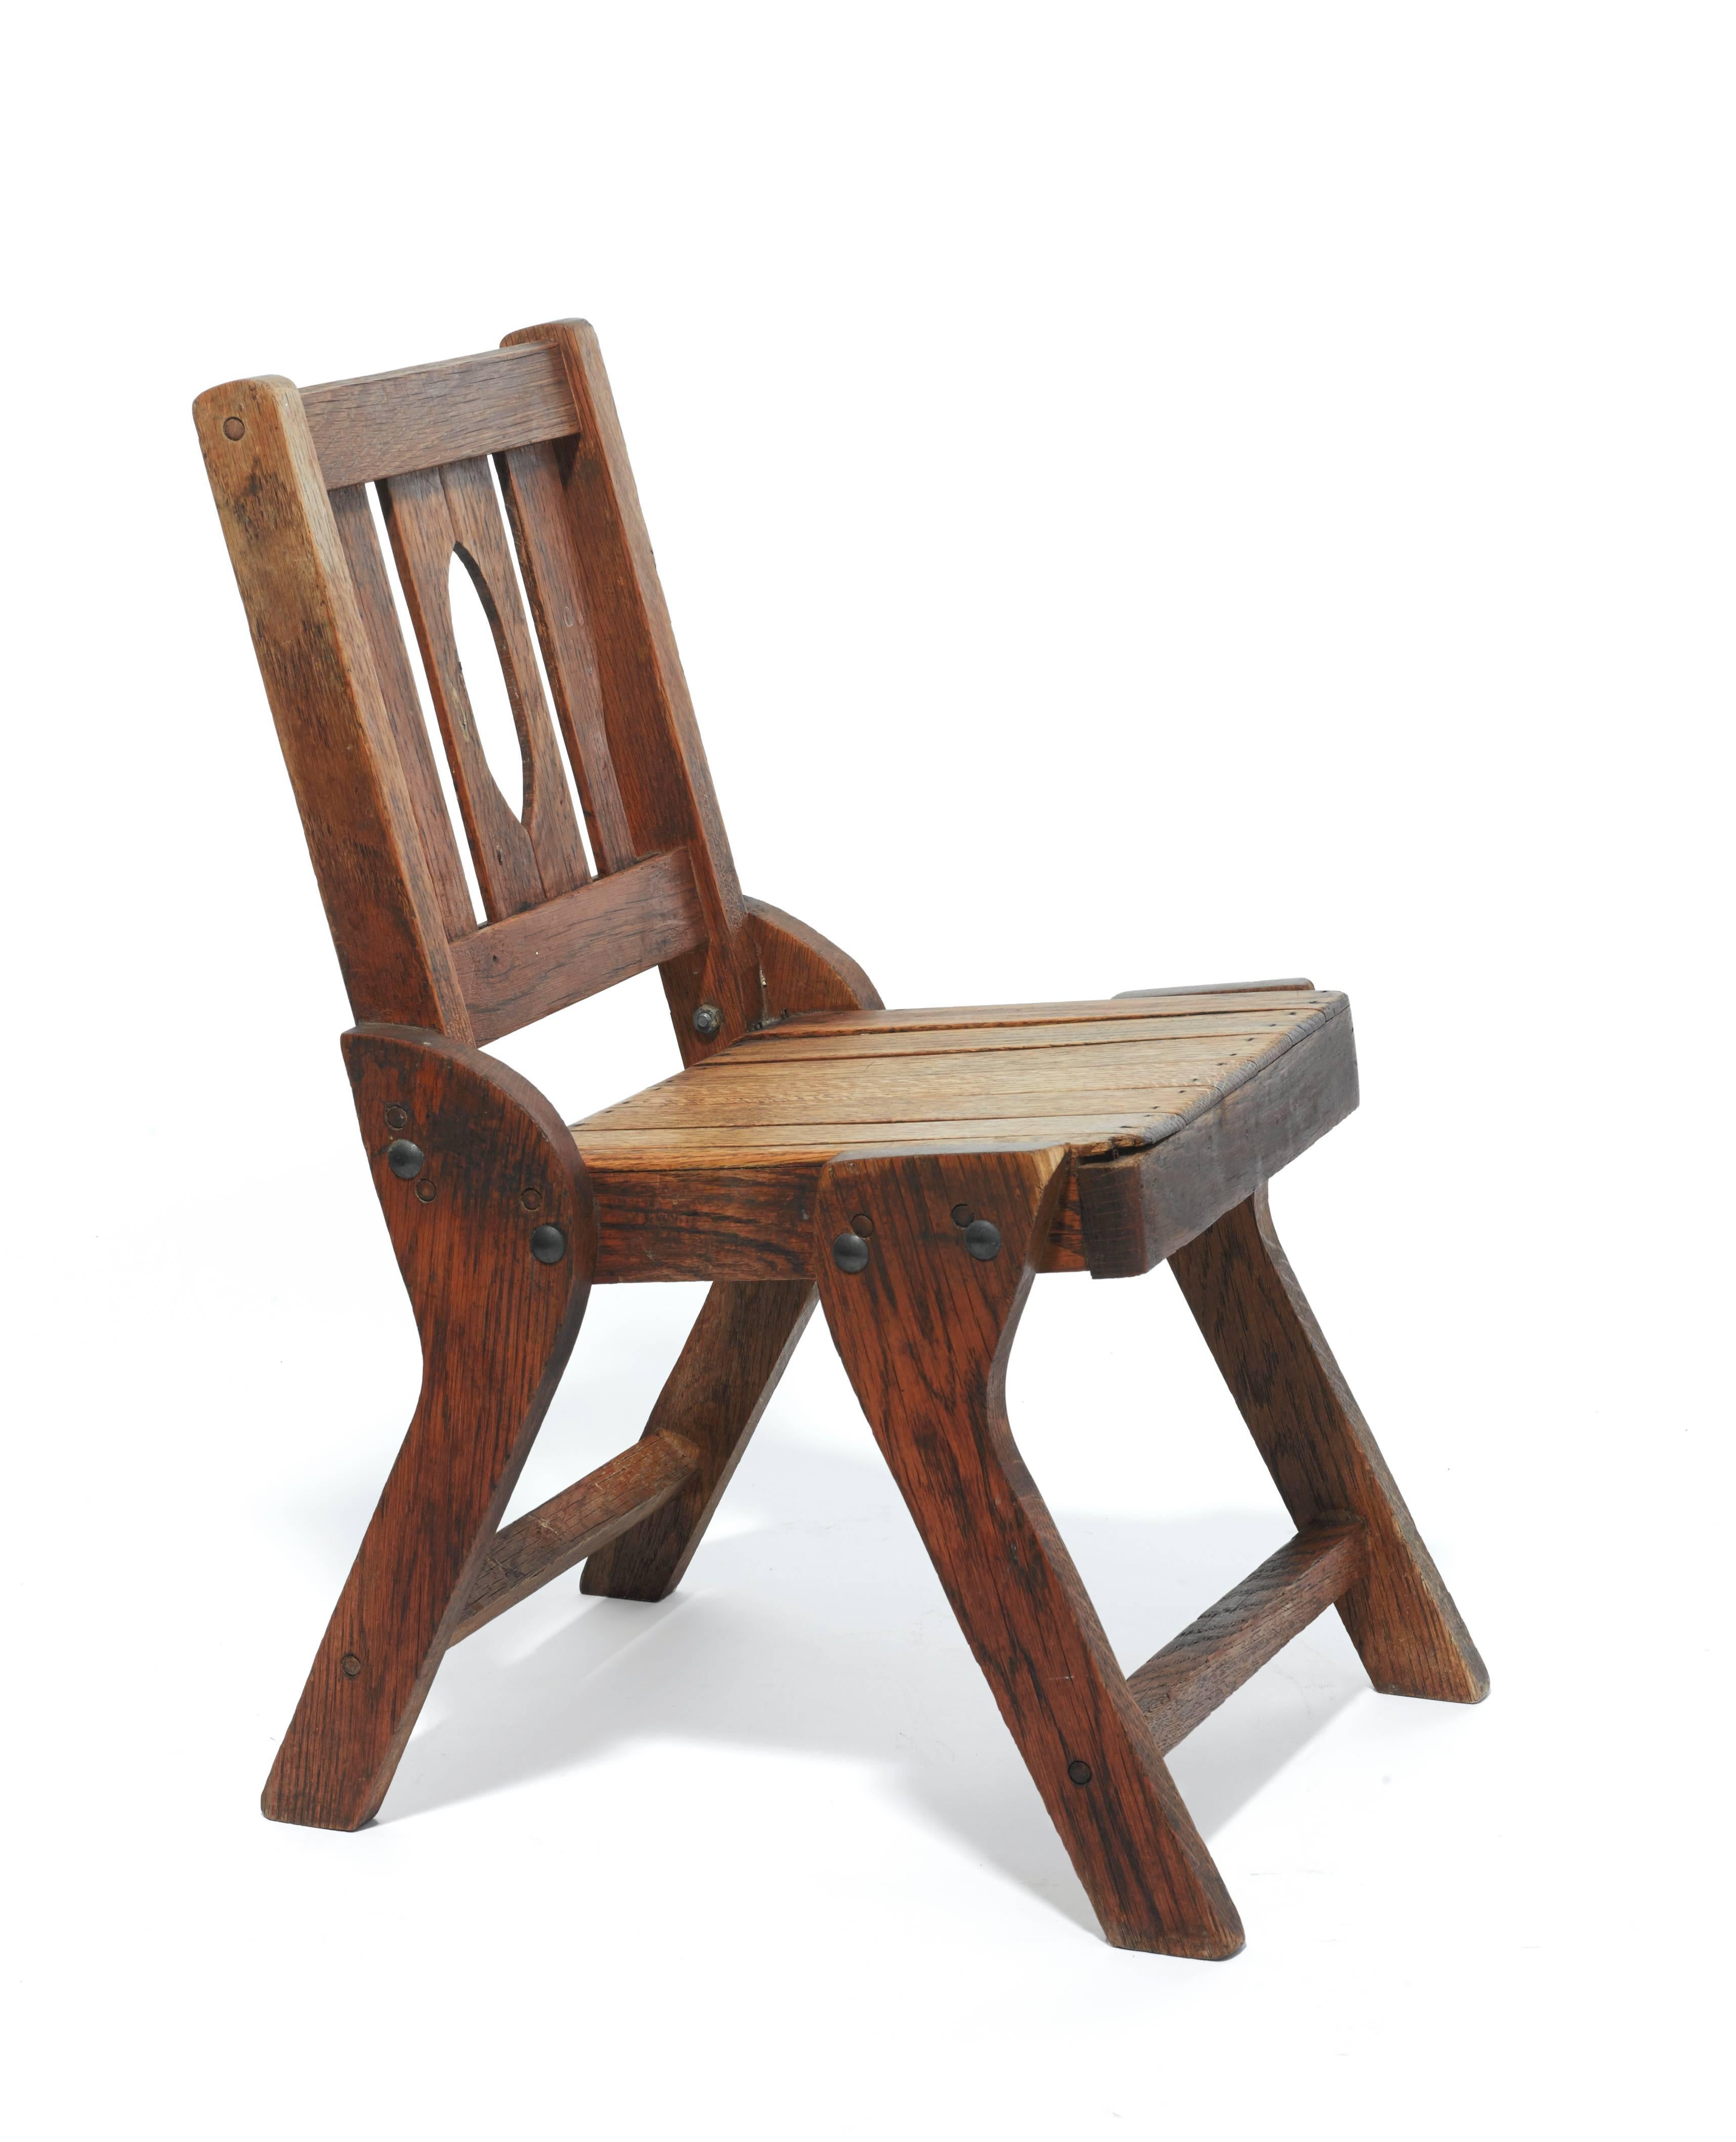 American Pair of 1930s Wooden Colorado Chairs For Sale